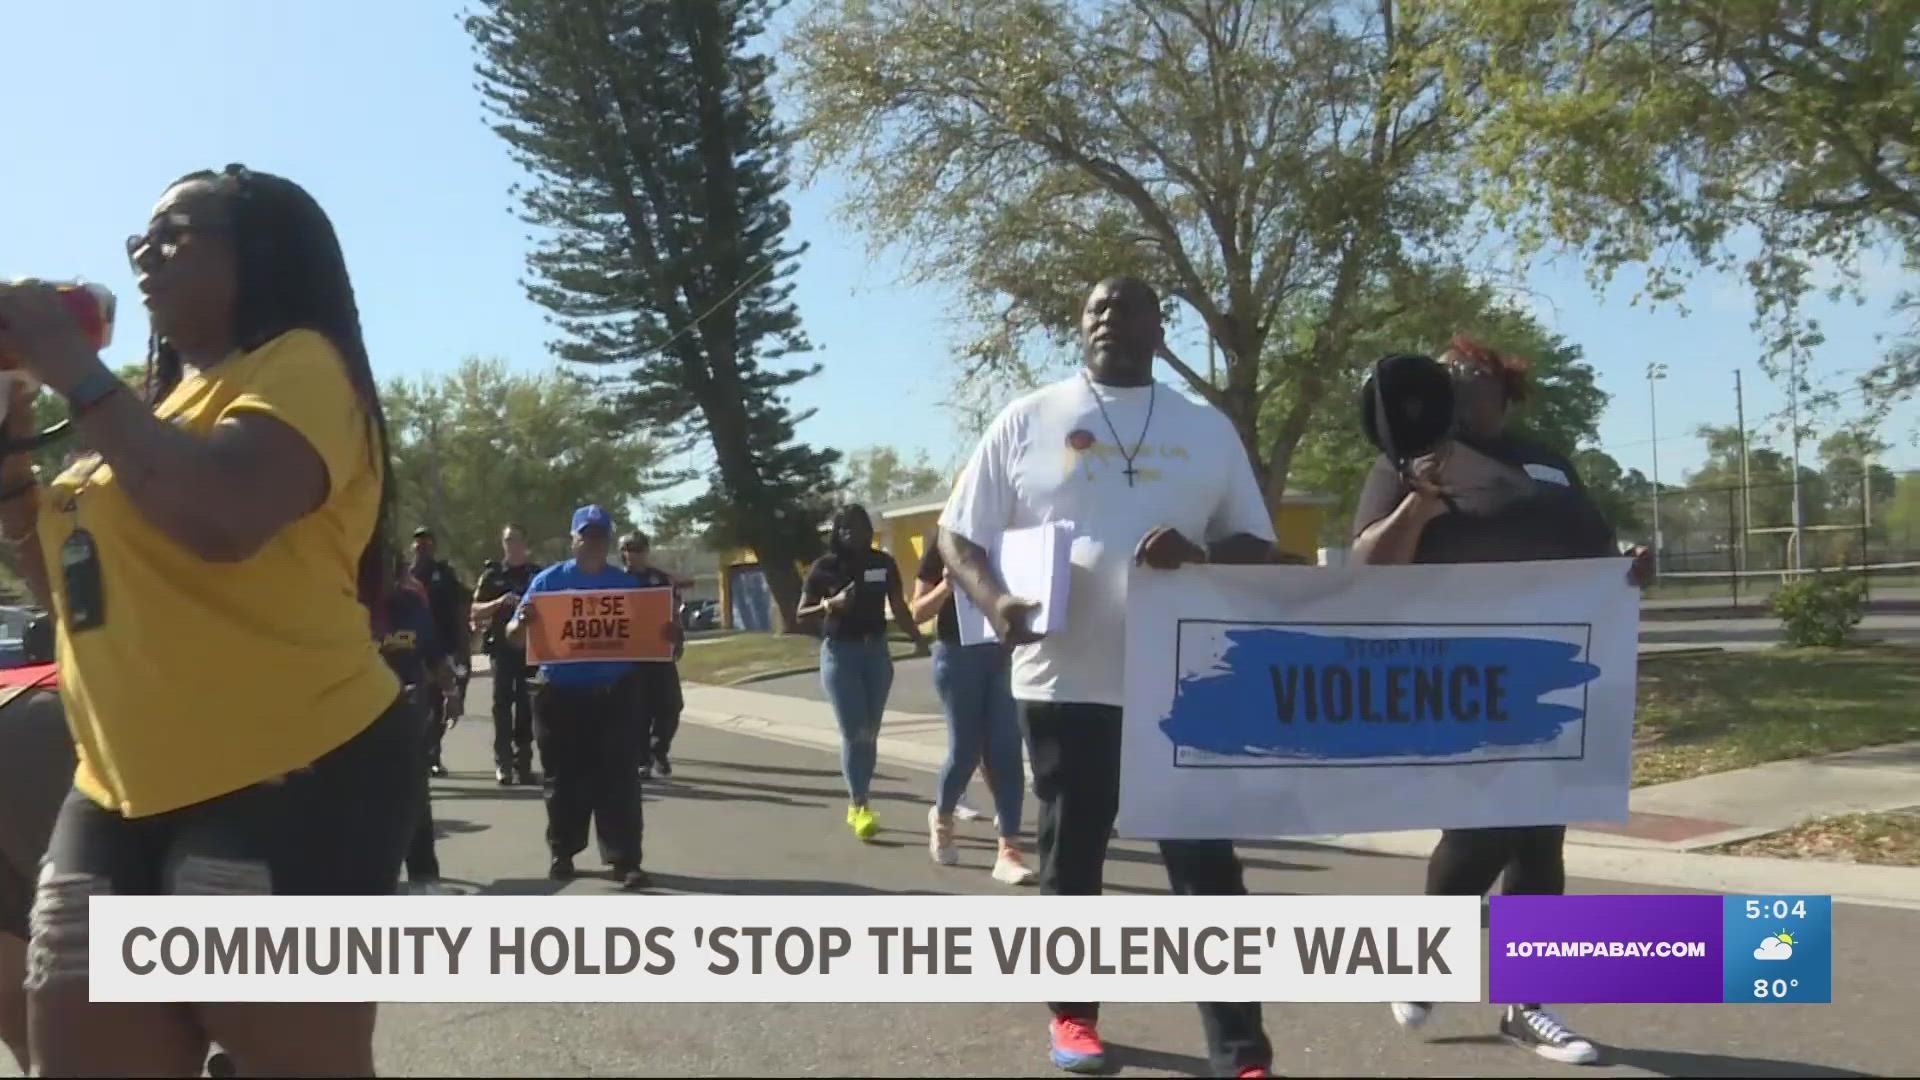 Several groups fighting to save lives in the community met at Wildwood Park, near the Jet Jackson Recreation Center.